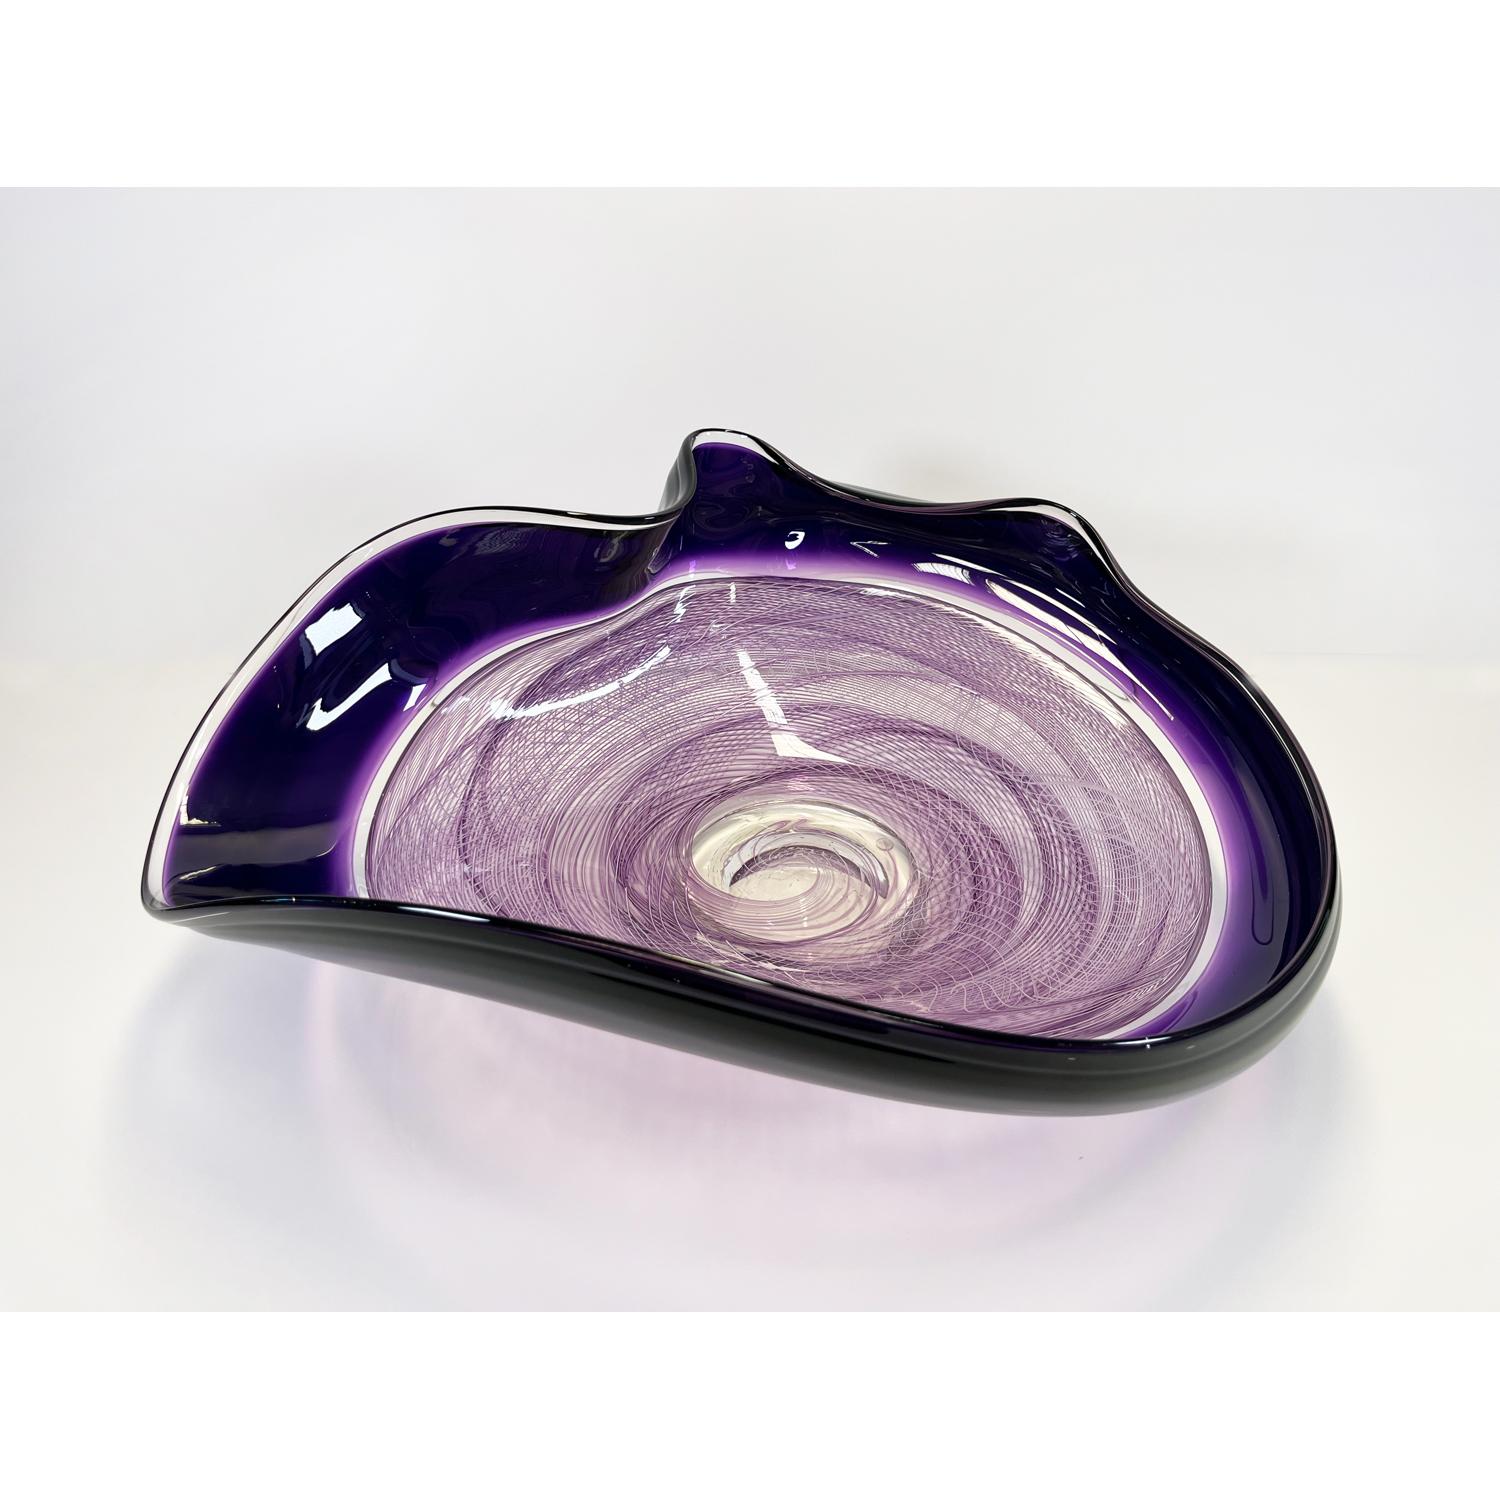 Lilac/Amethyst Rondelle Bowl, Modern Canadian Glass Sculpture, 2023 - Abstract Art by David Thai